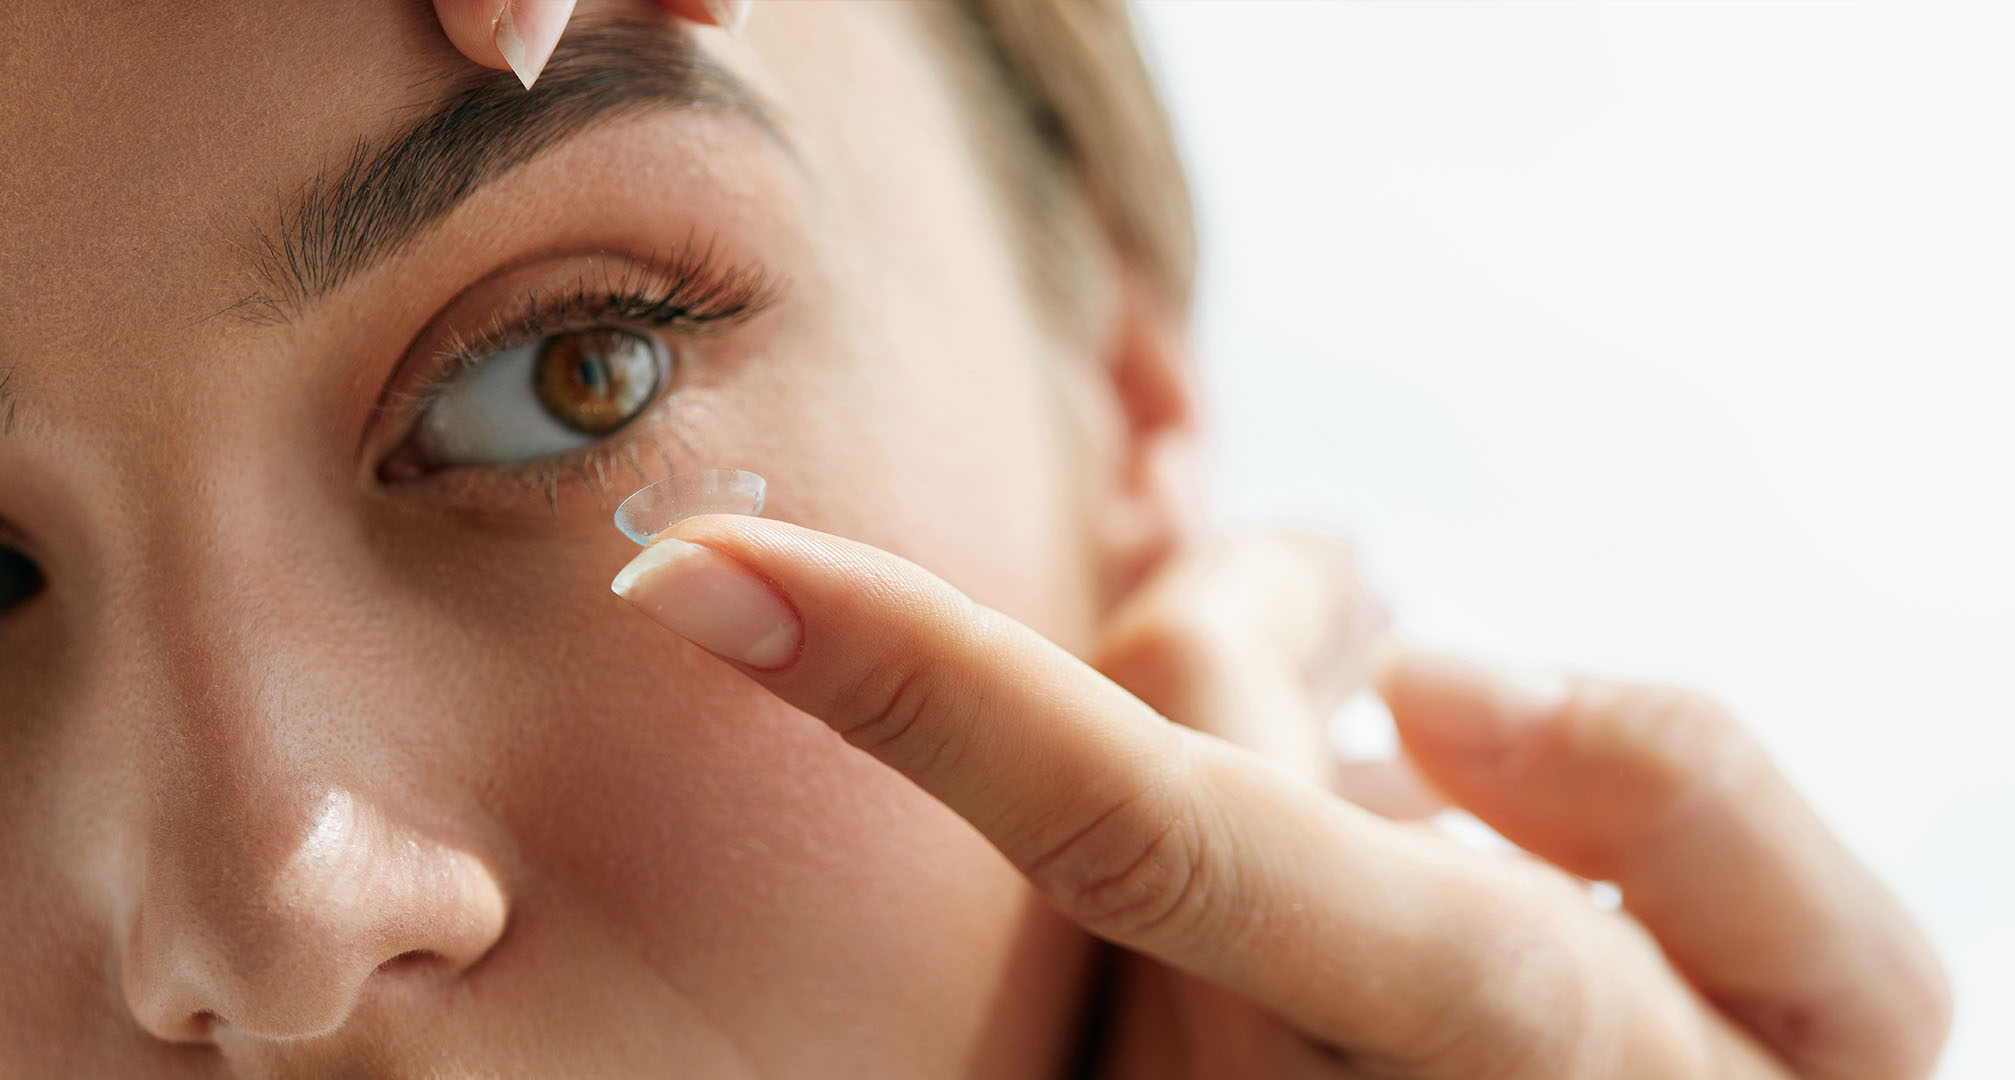 7-reasons-you-do-not-see-well-with-contact-lenses-3